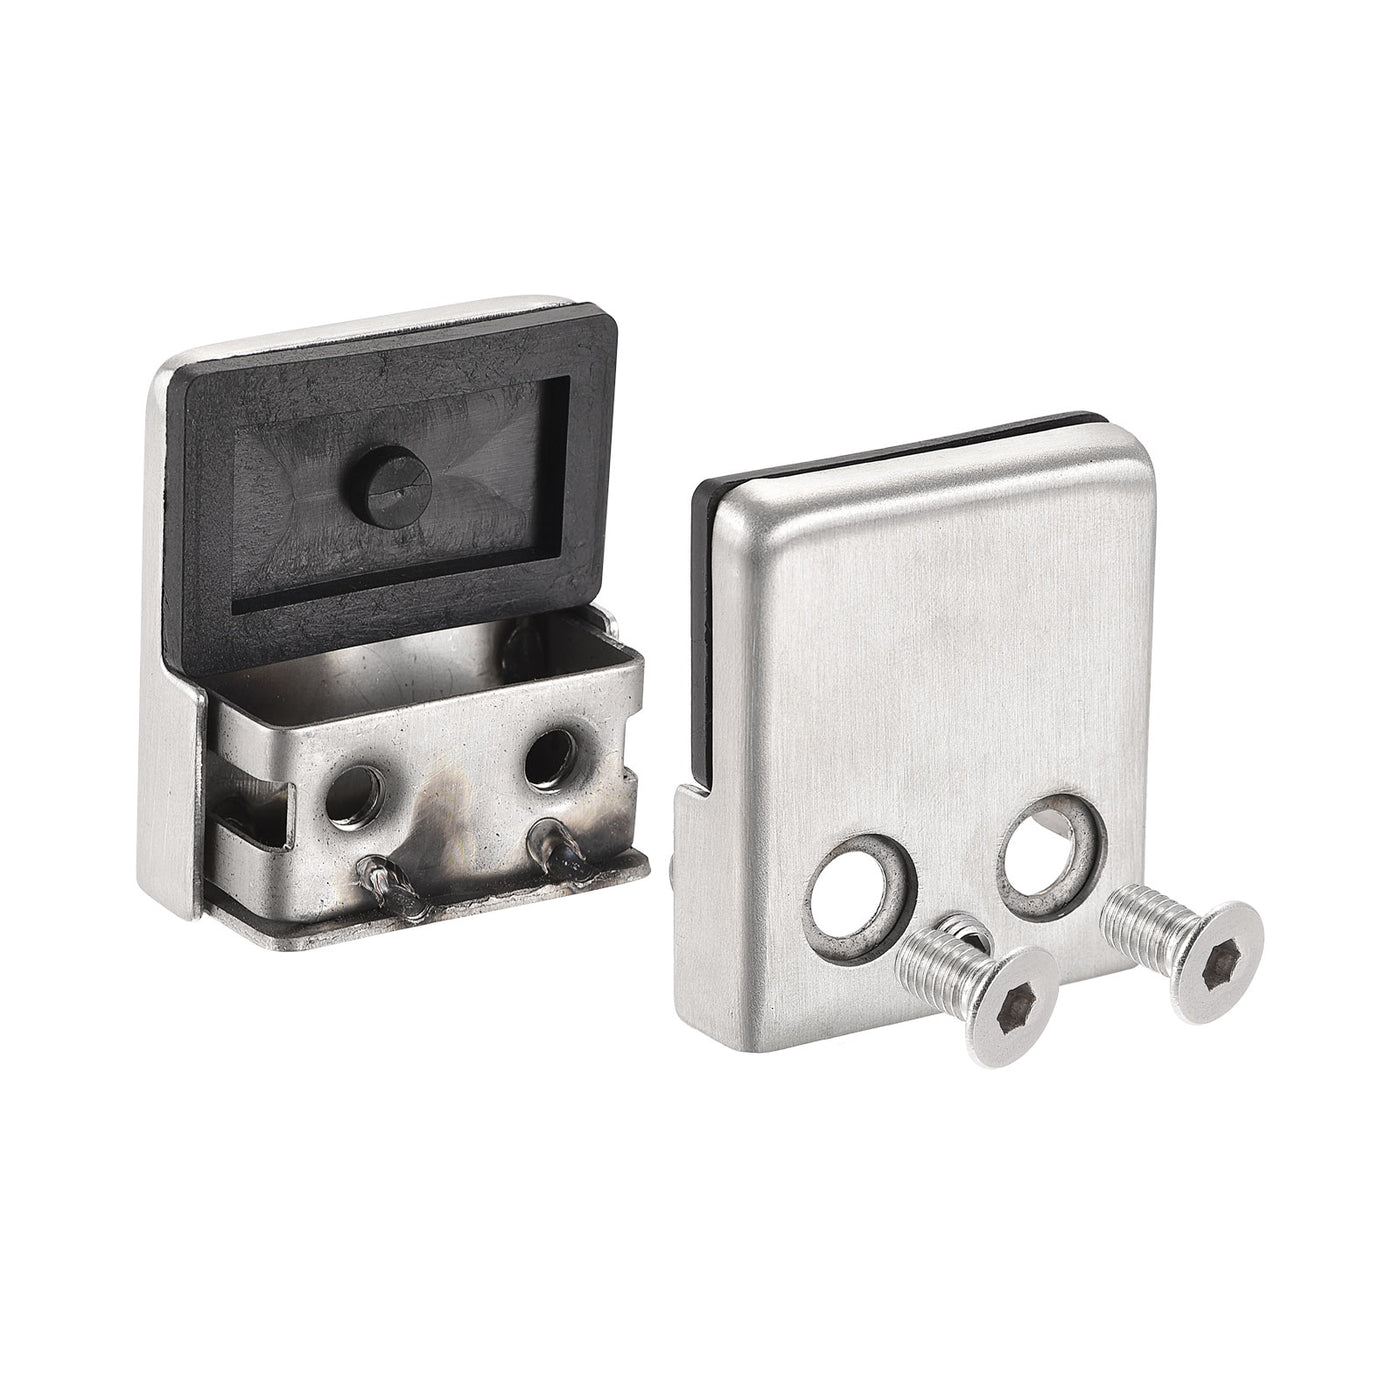 Uxcell Uxcell Stainless Steel Glass Clamp, Flat Bottom Square Glass Bracket for 8-10mm